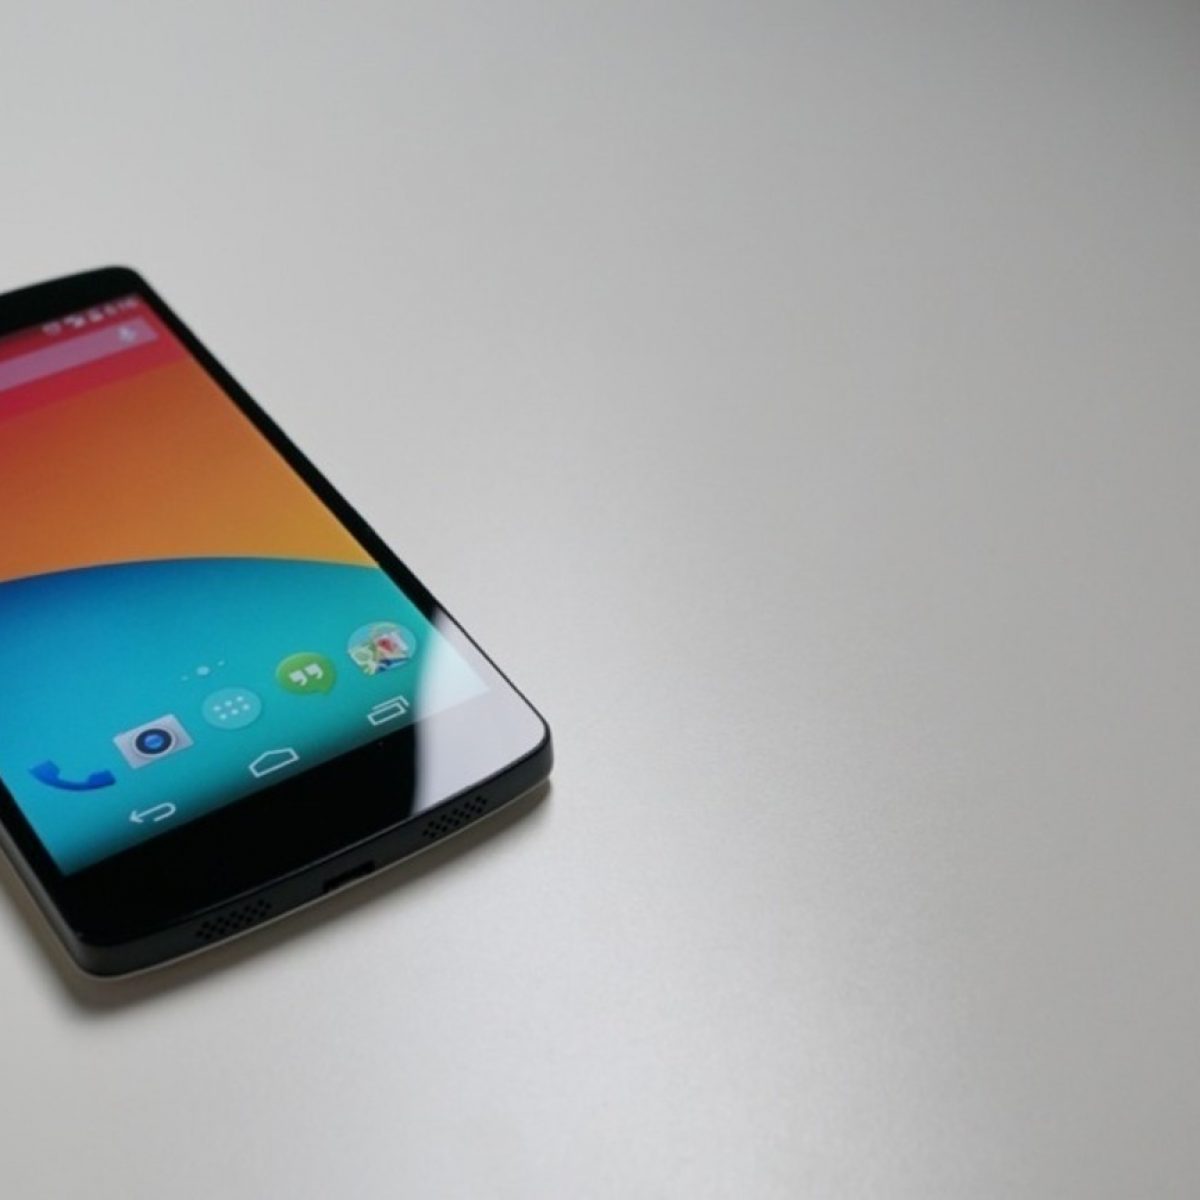 LG G3 Android update: latest news